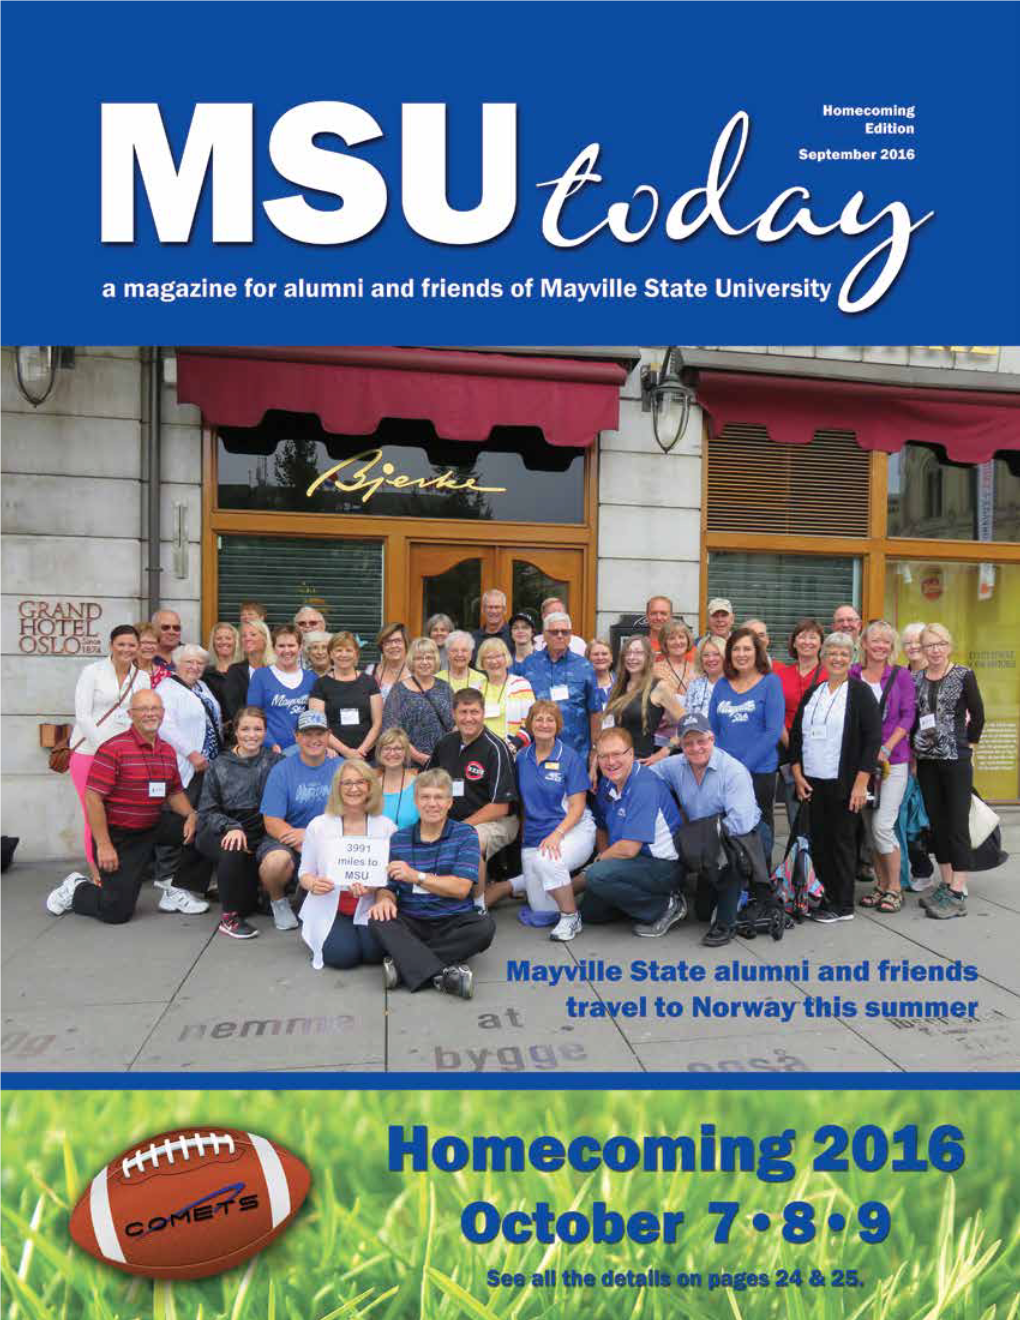 Homecoming 2016 Edition of MSU Today